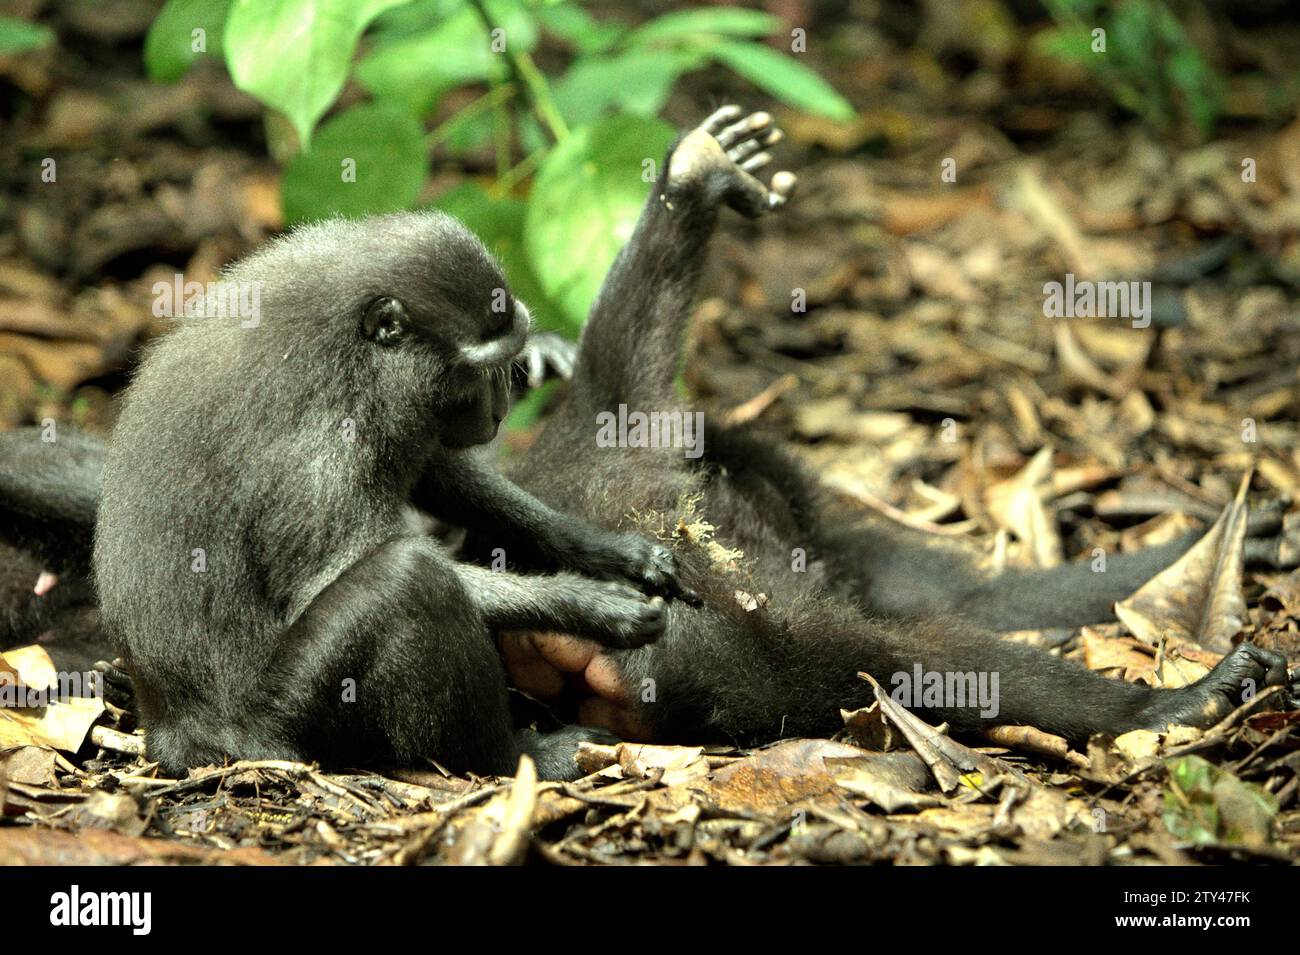 A crested macaque (Macaca nigra) grooms another individual, as they are sitting and lying on the ground while having social activity in Tangkoko forest, North Sulawesi, Indonesia. The International Union for Conservation of Nature (IUCN) concludes that rising temperatures have led to—among others—ecological, behavioral, and physiological changes in wildlife species and biodiversity. 'In addition to increased rates of disease and degraded habitats, climate change is also causing changes in species themselves, which threaten their survival,' they wrote in a Dec 19, 2023, publication on IUCN.org. Stock Photo